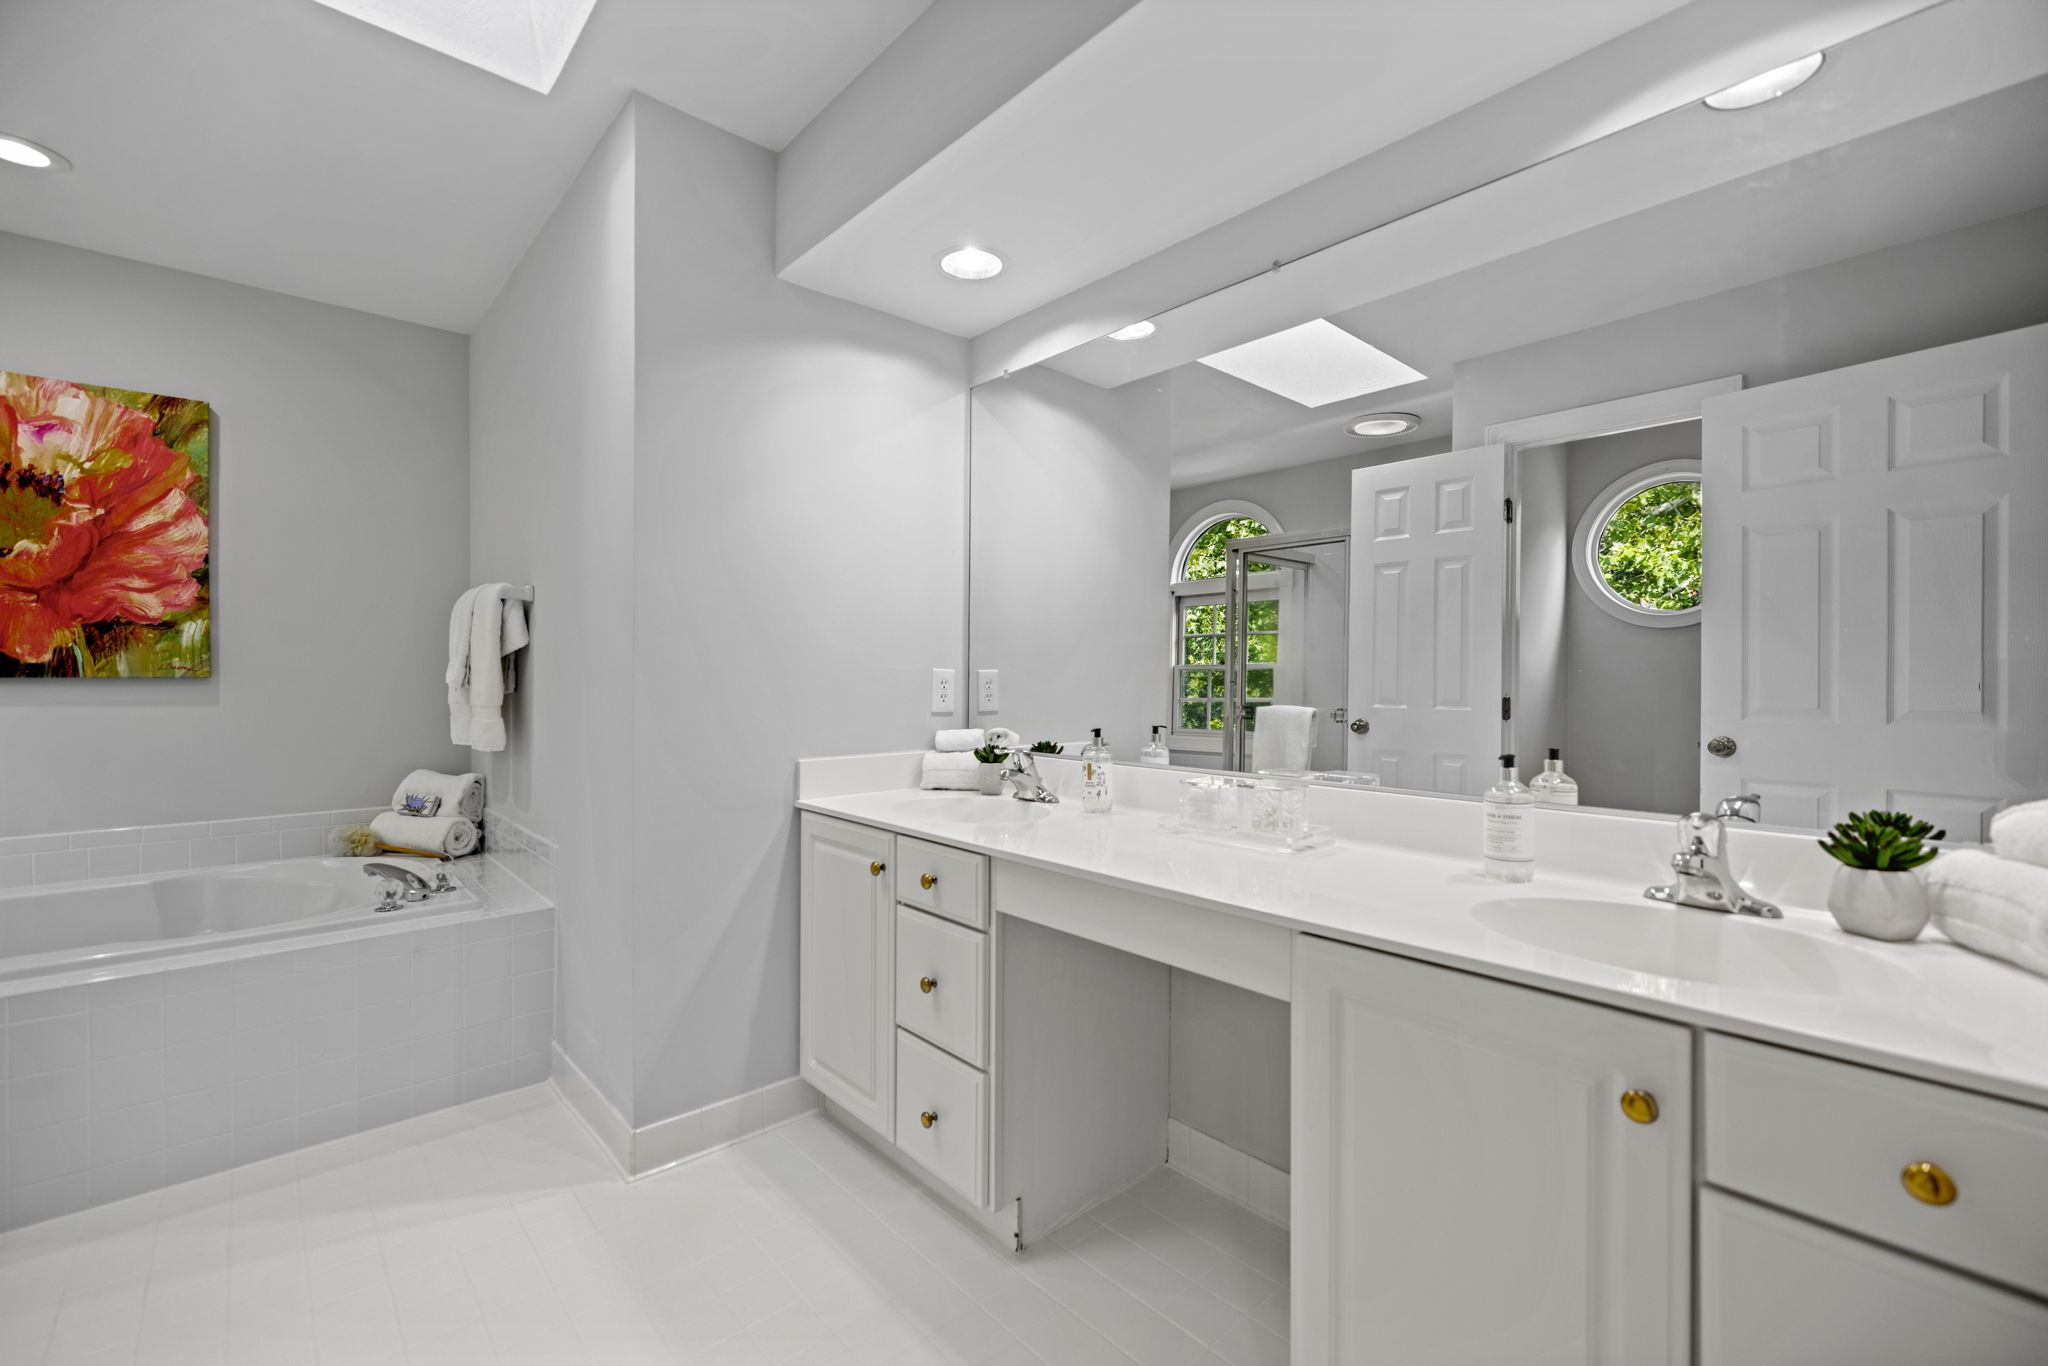 Primary Bath with Dual Vanities and Skylight